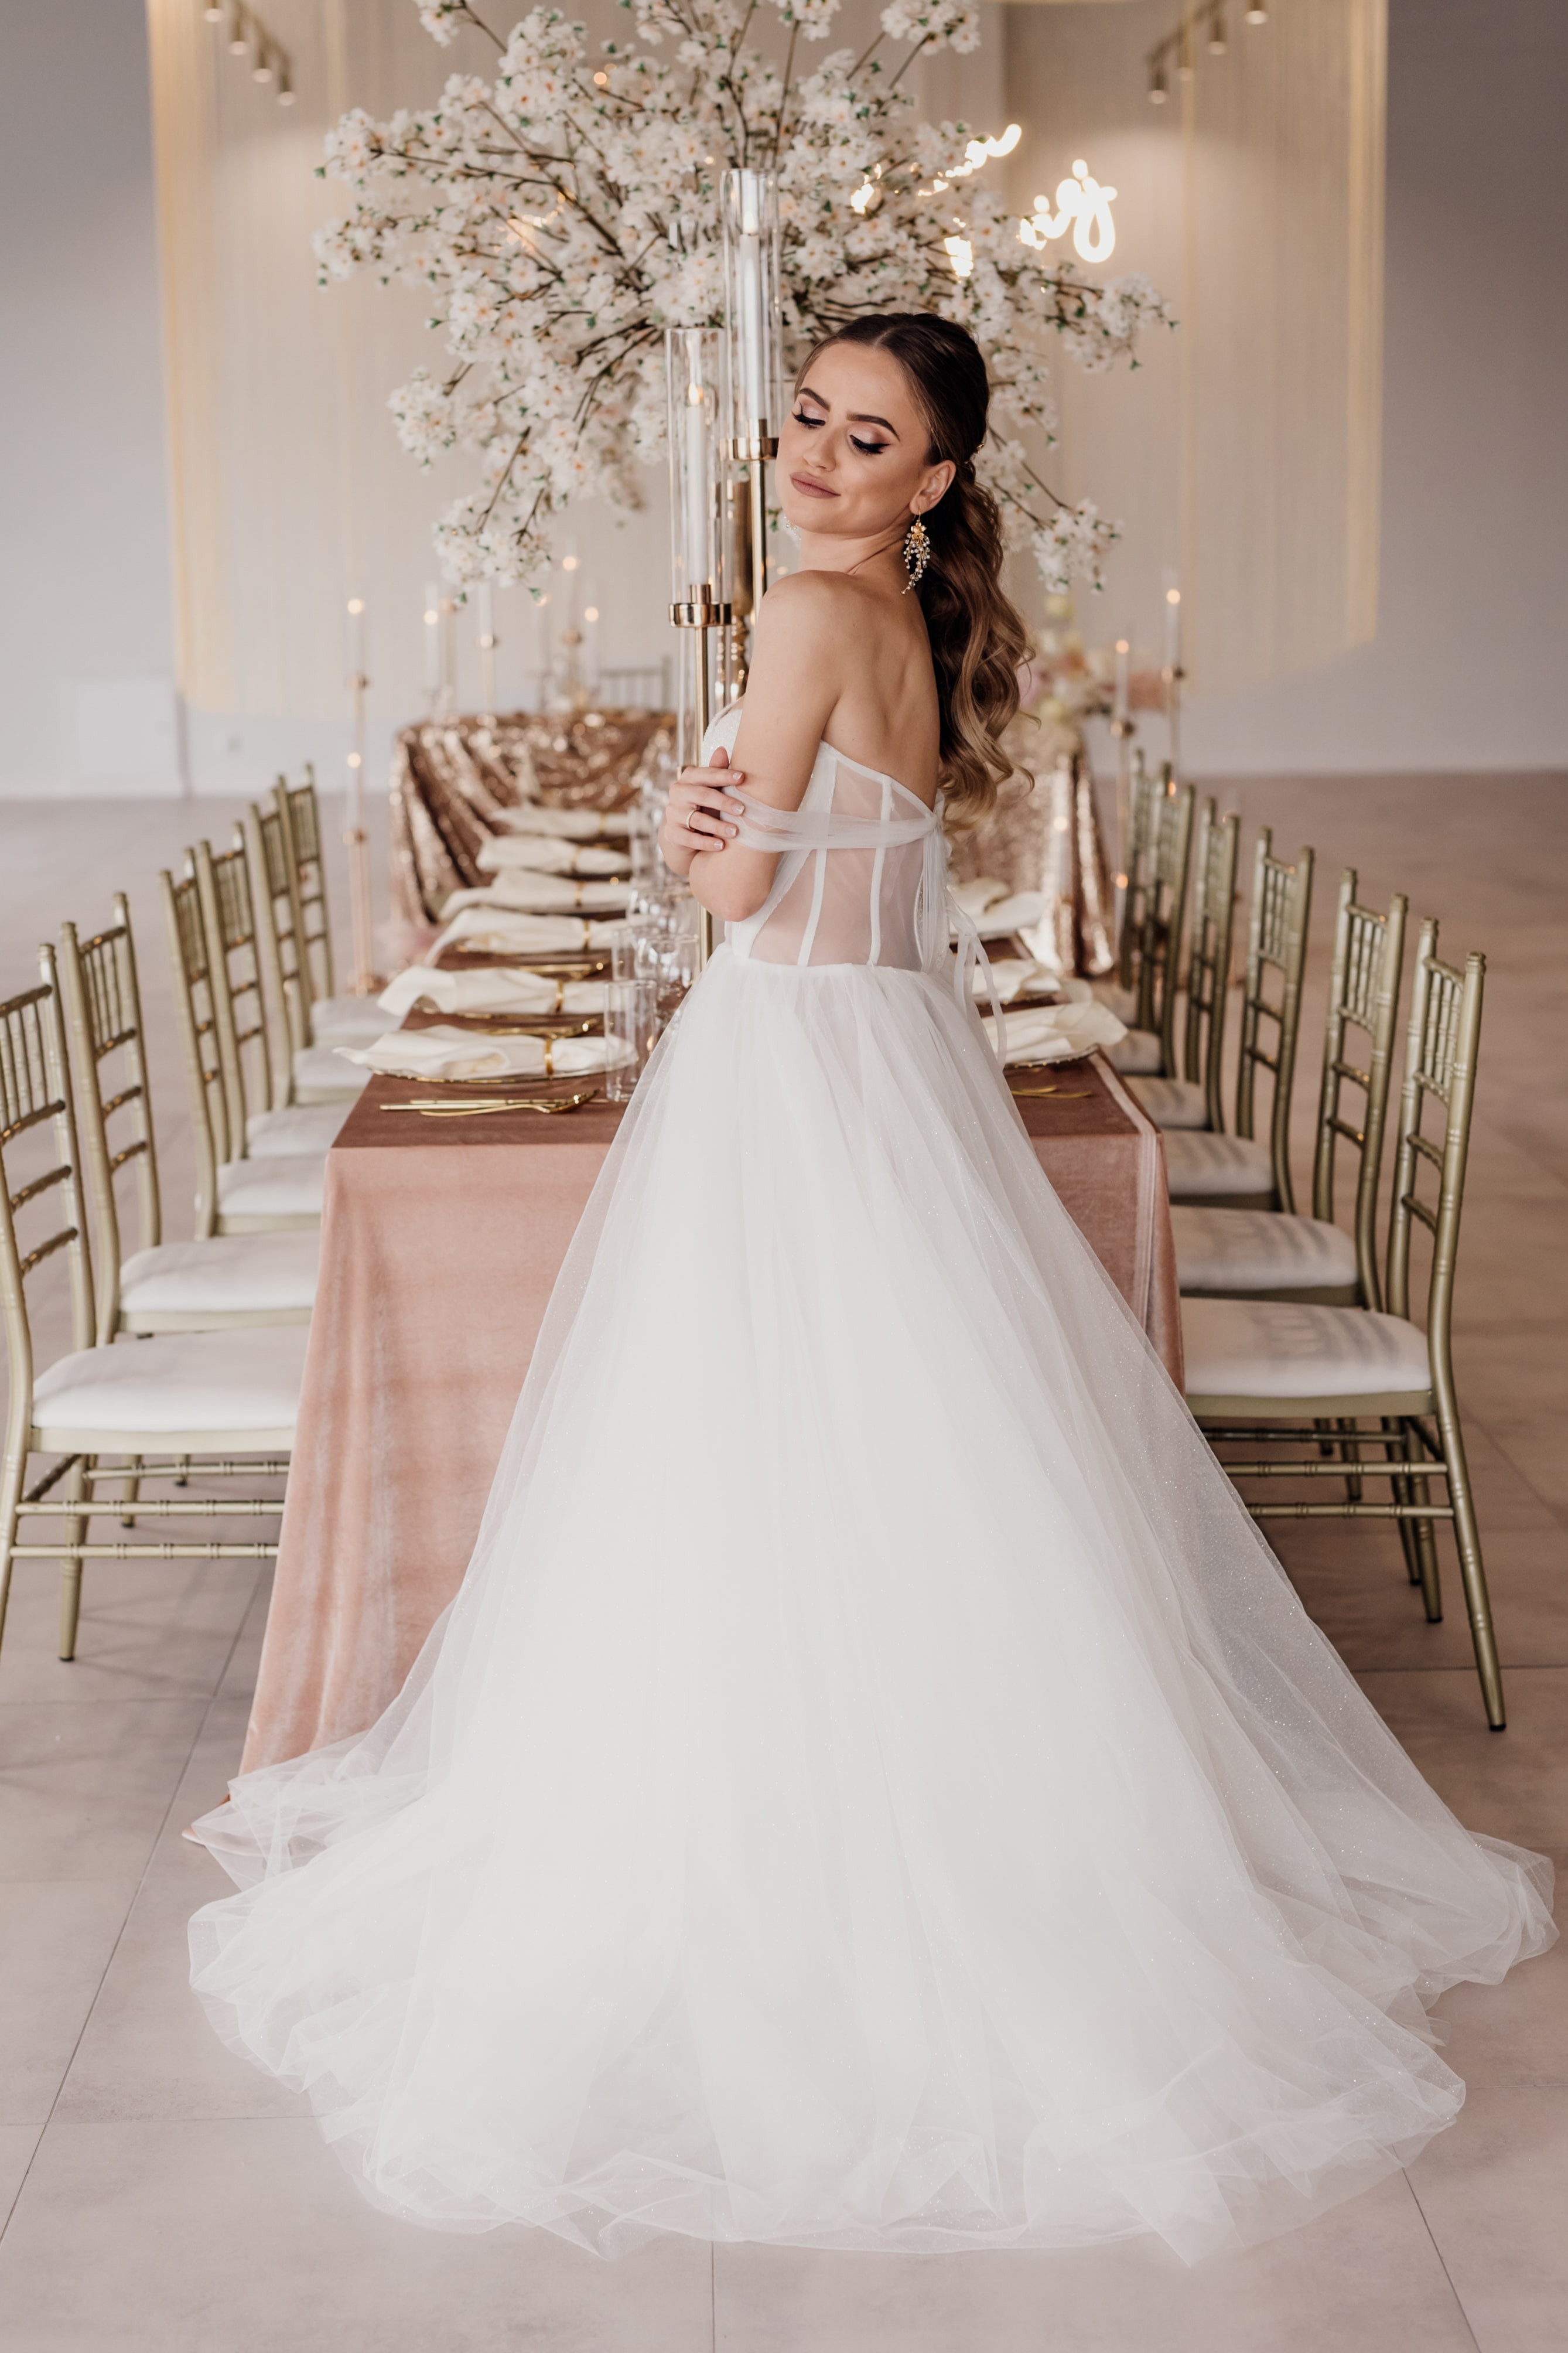 A bride in a white dress in a wedding room